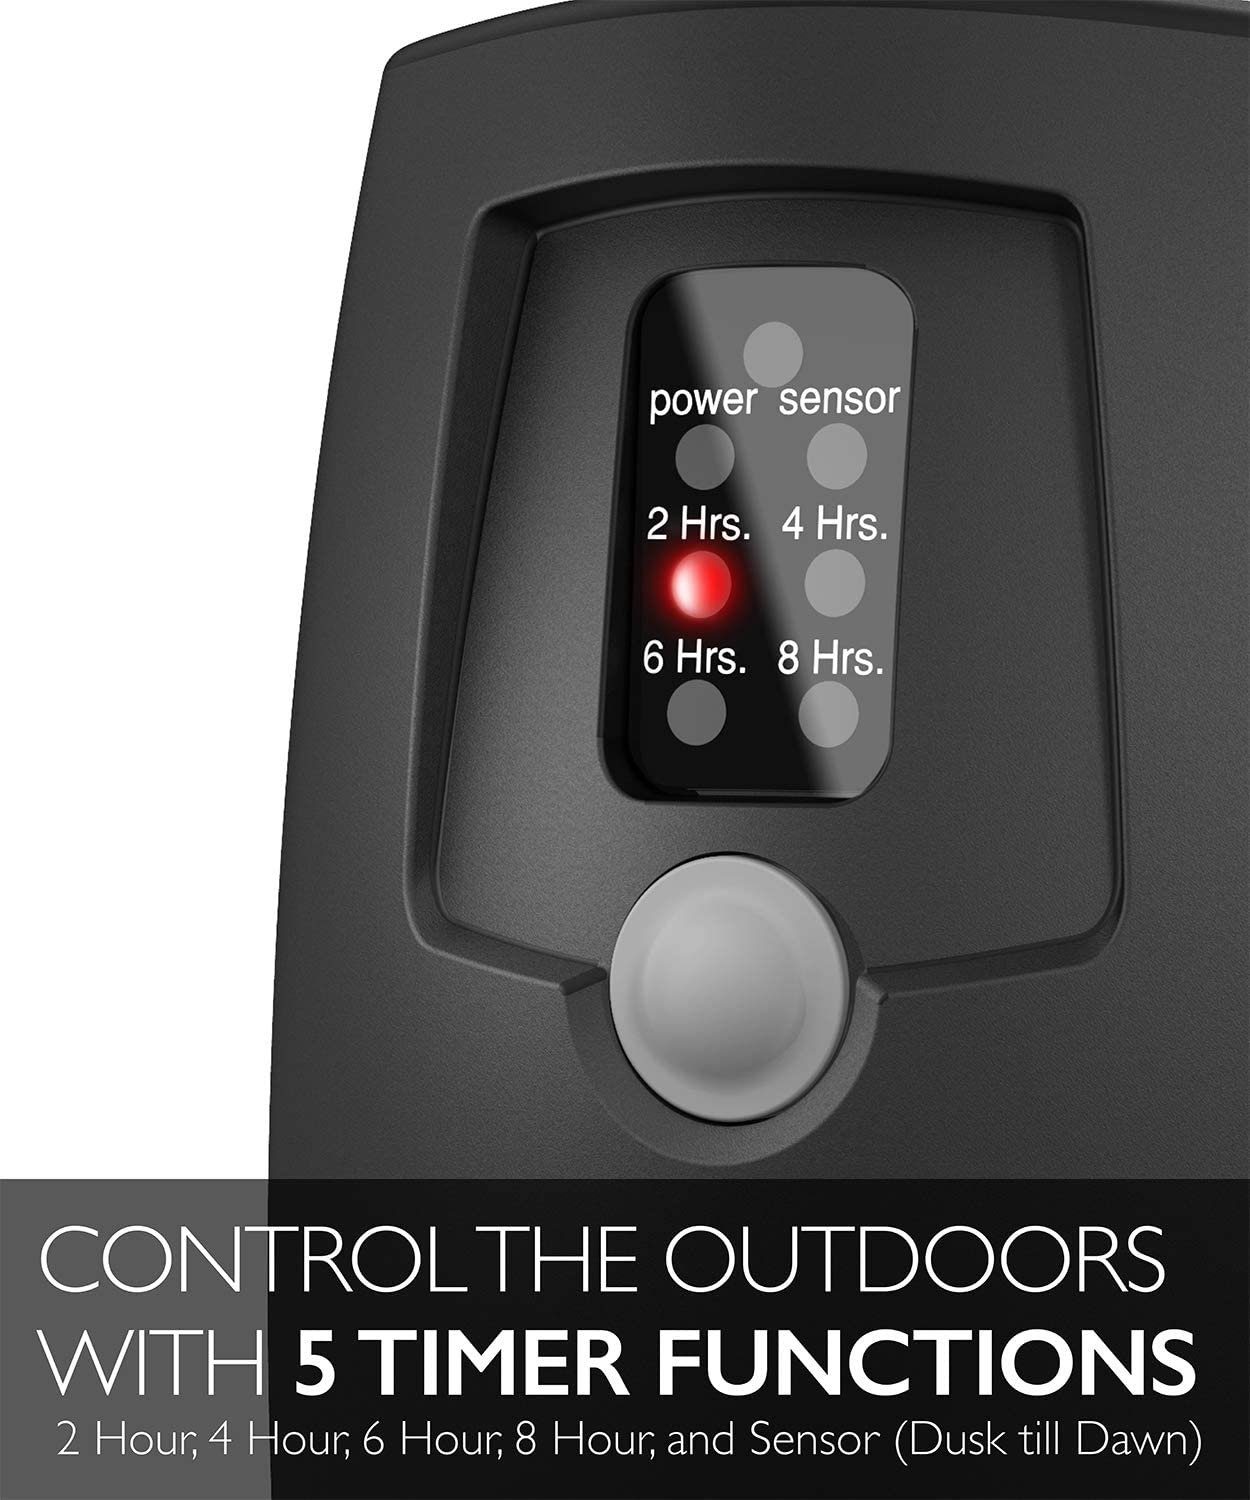 Indoor/Outdoor Wireless Remote Control Outlet - Fosmon